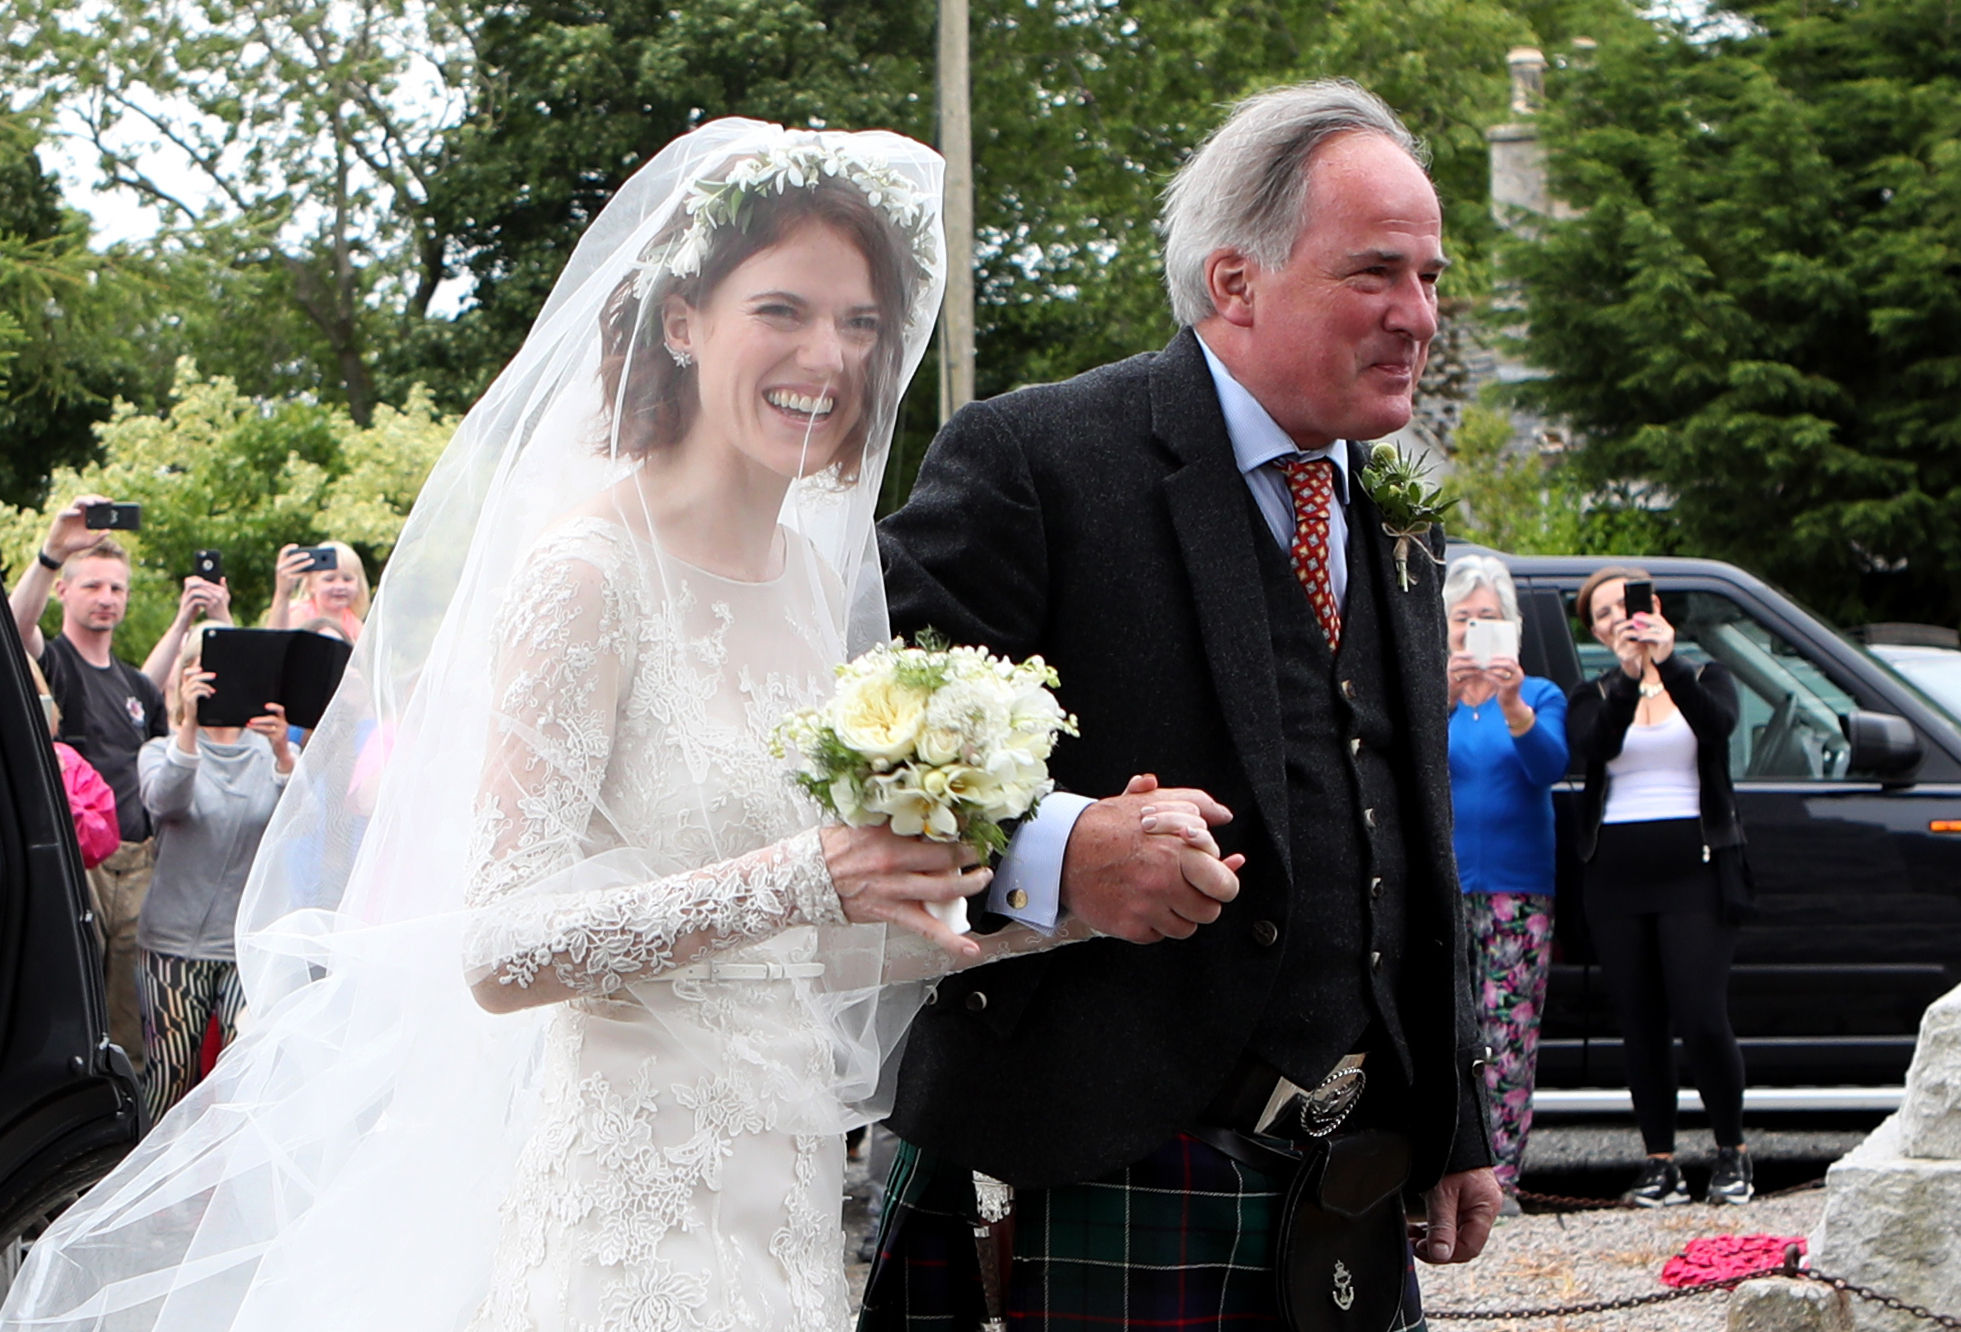 Rose Leslie with her father Sebastian arrive at church